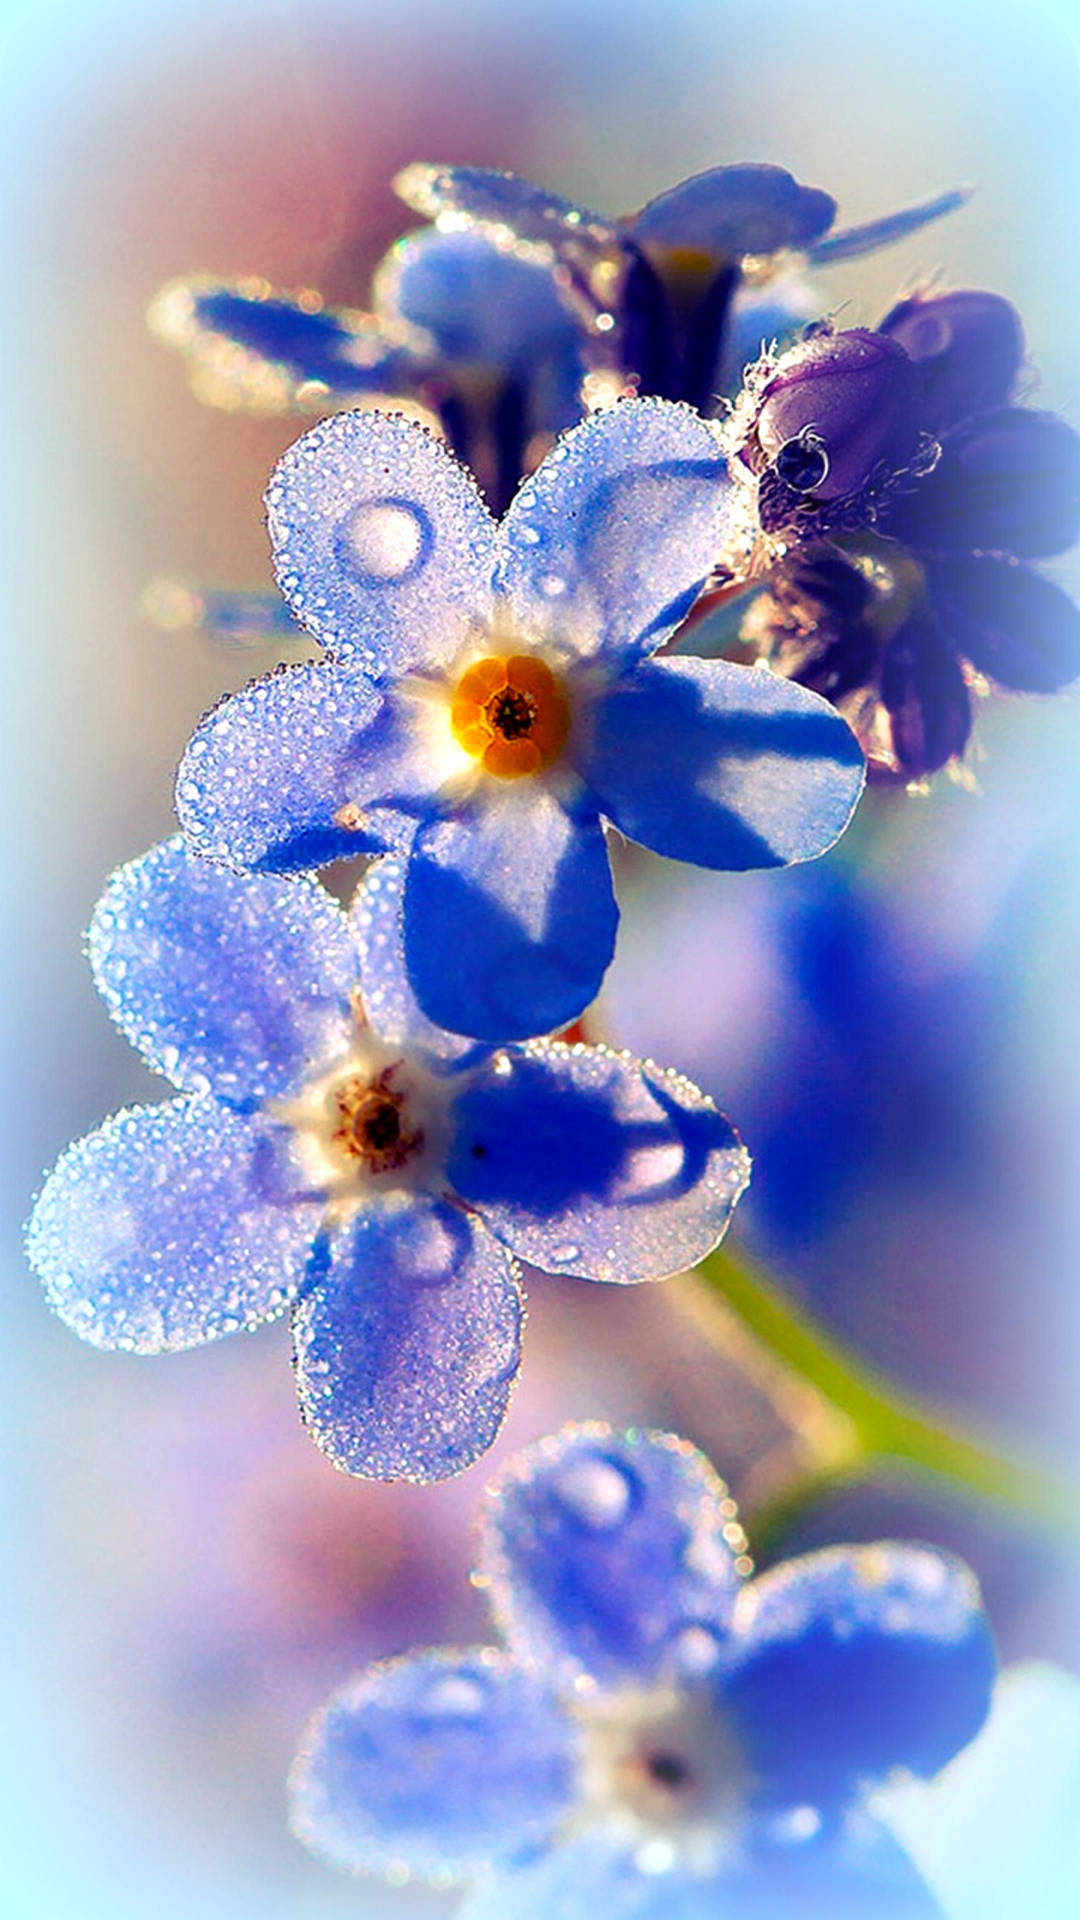 Adorable Blue Forget Me Not Flowers Background